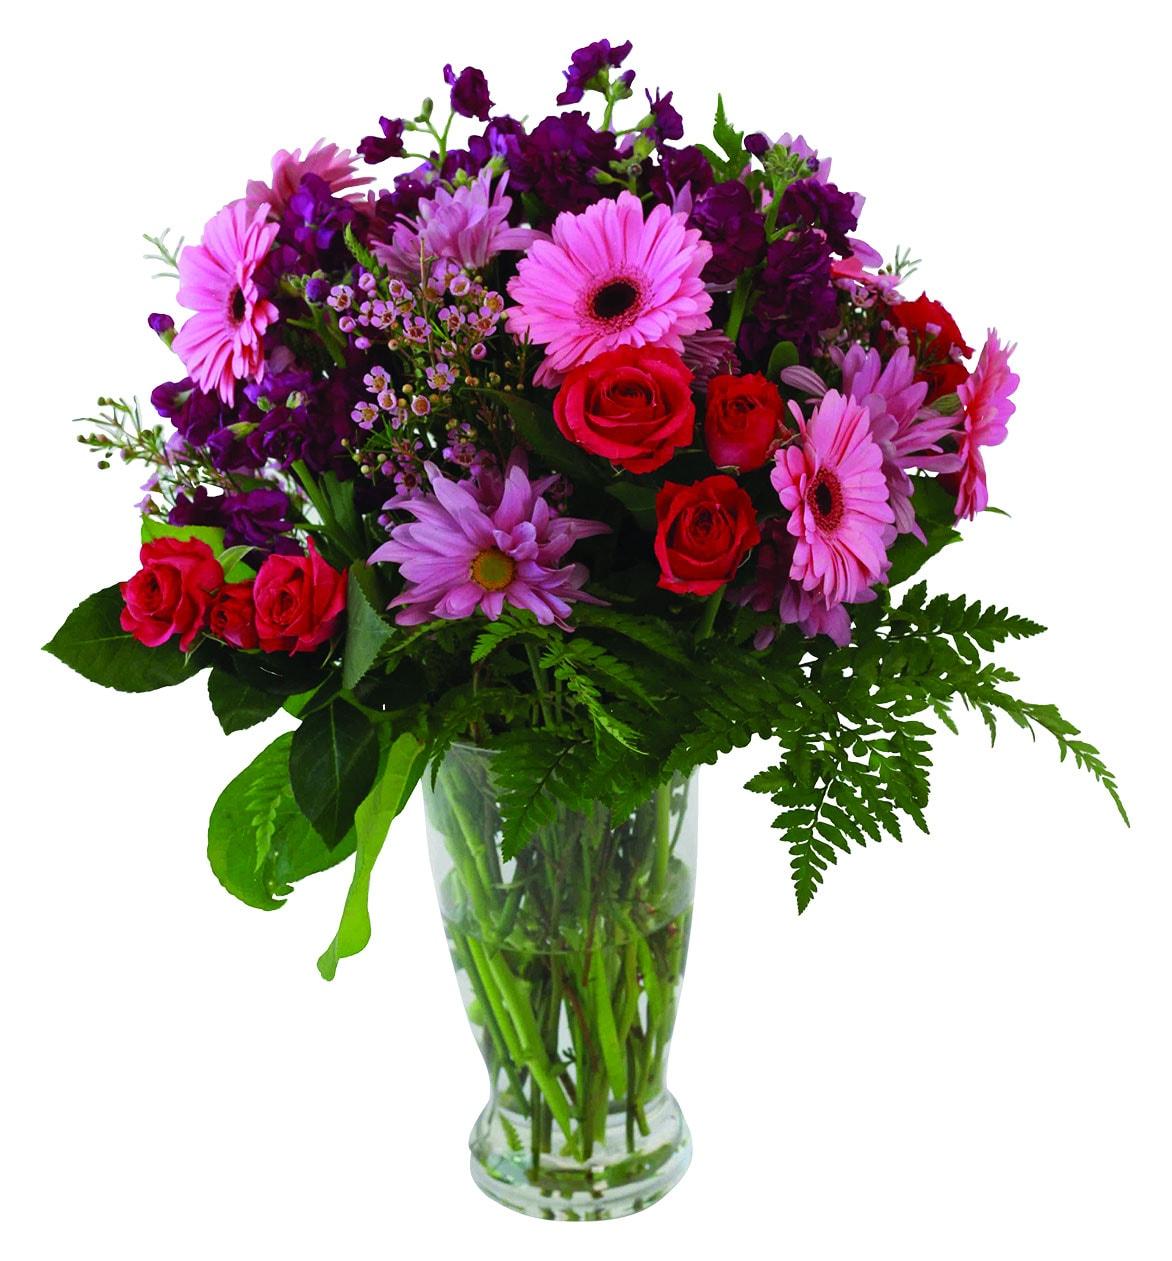 A vase arrangement with red roses, pink mini gerberas and mums, greens and fillers.